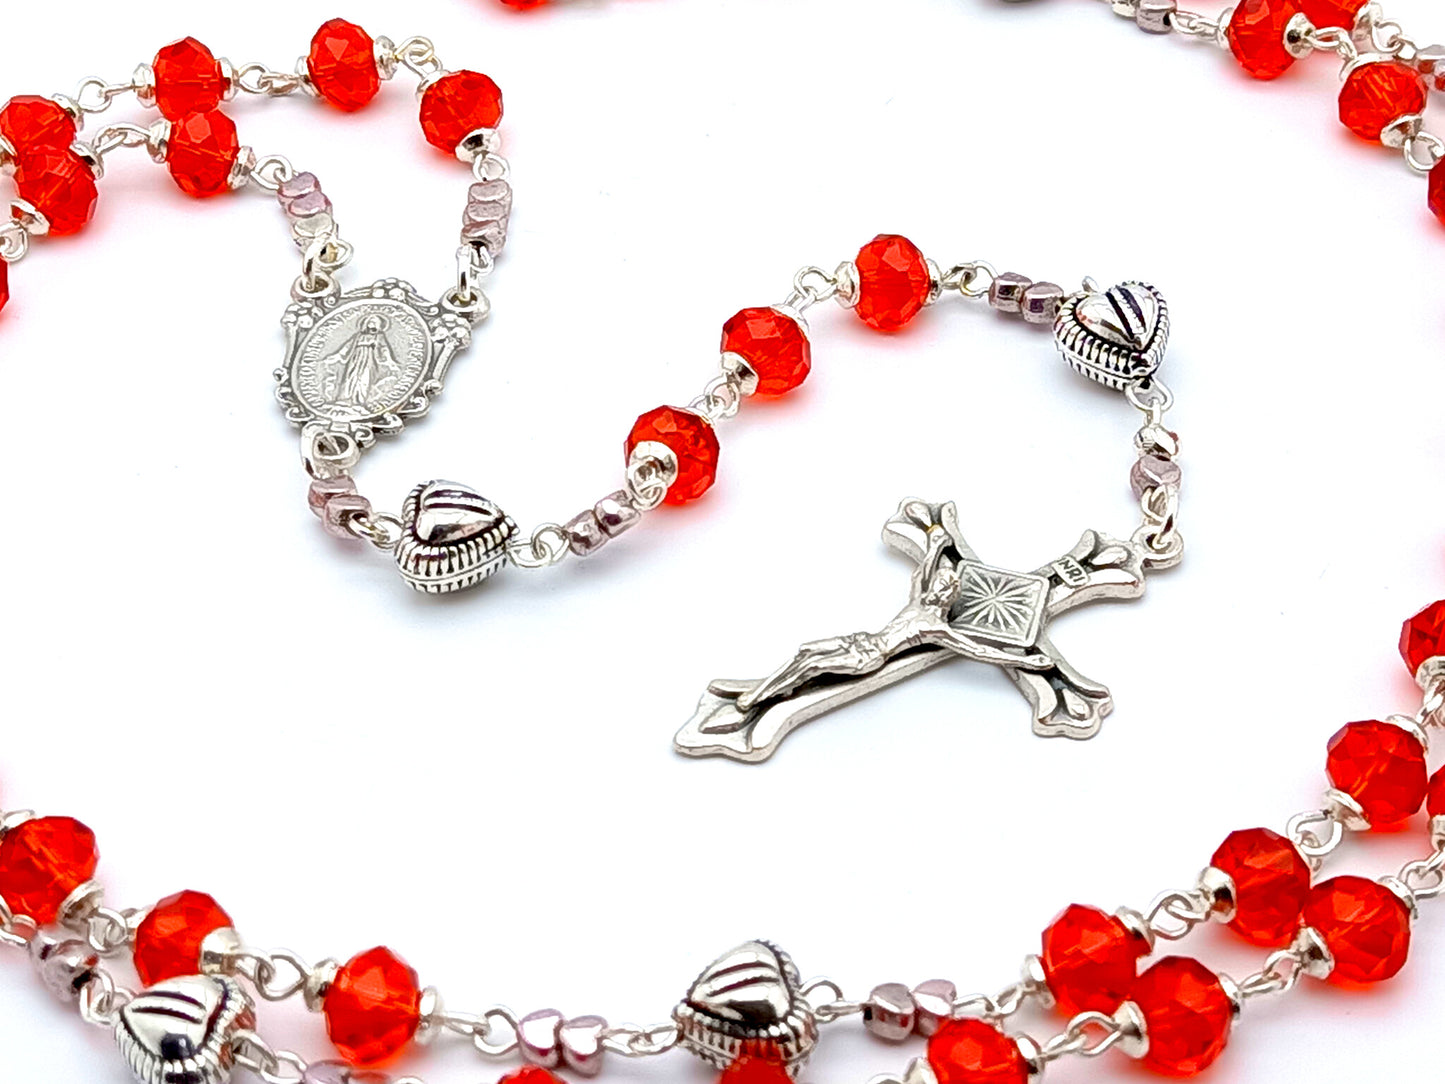 Miraculous medal unique rosary beads with red faceted glass and silver beads, silver crucifix and centre medal.